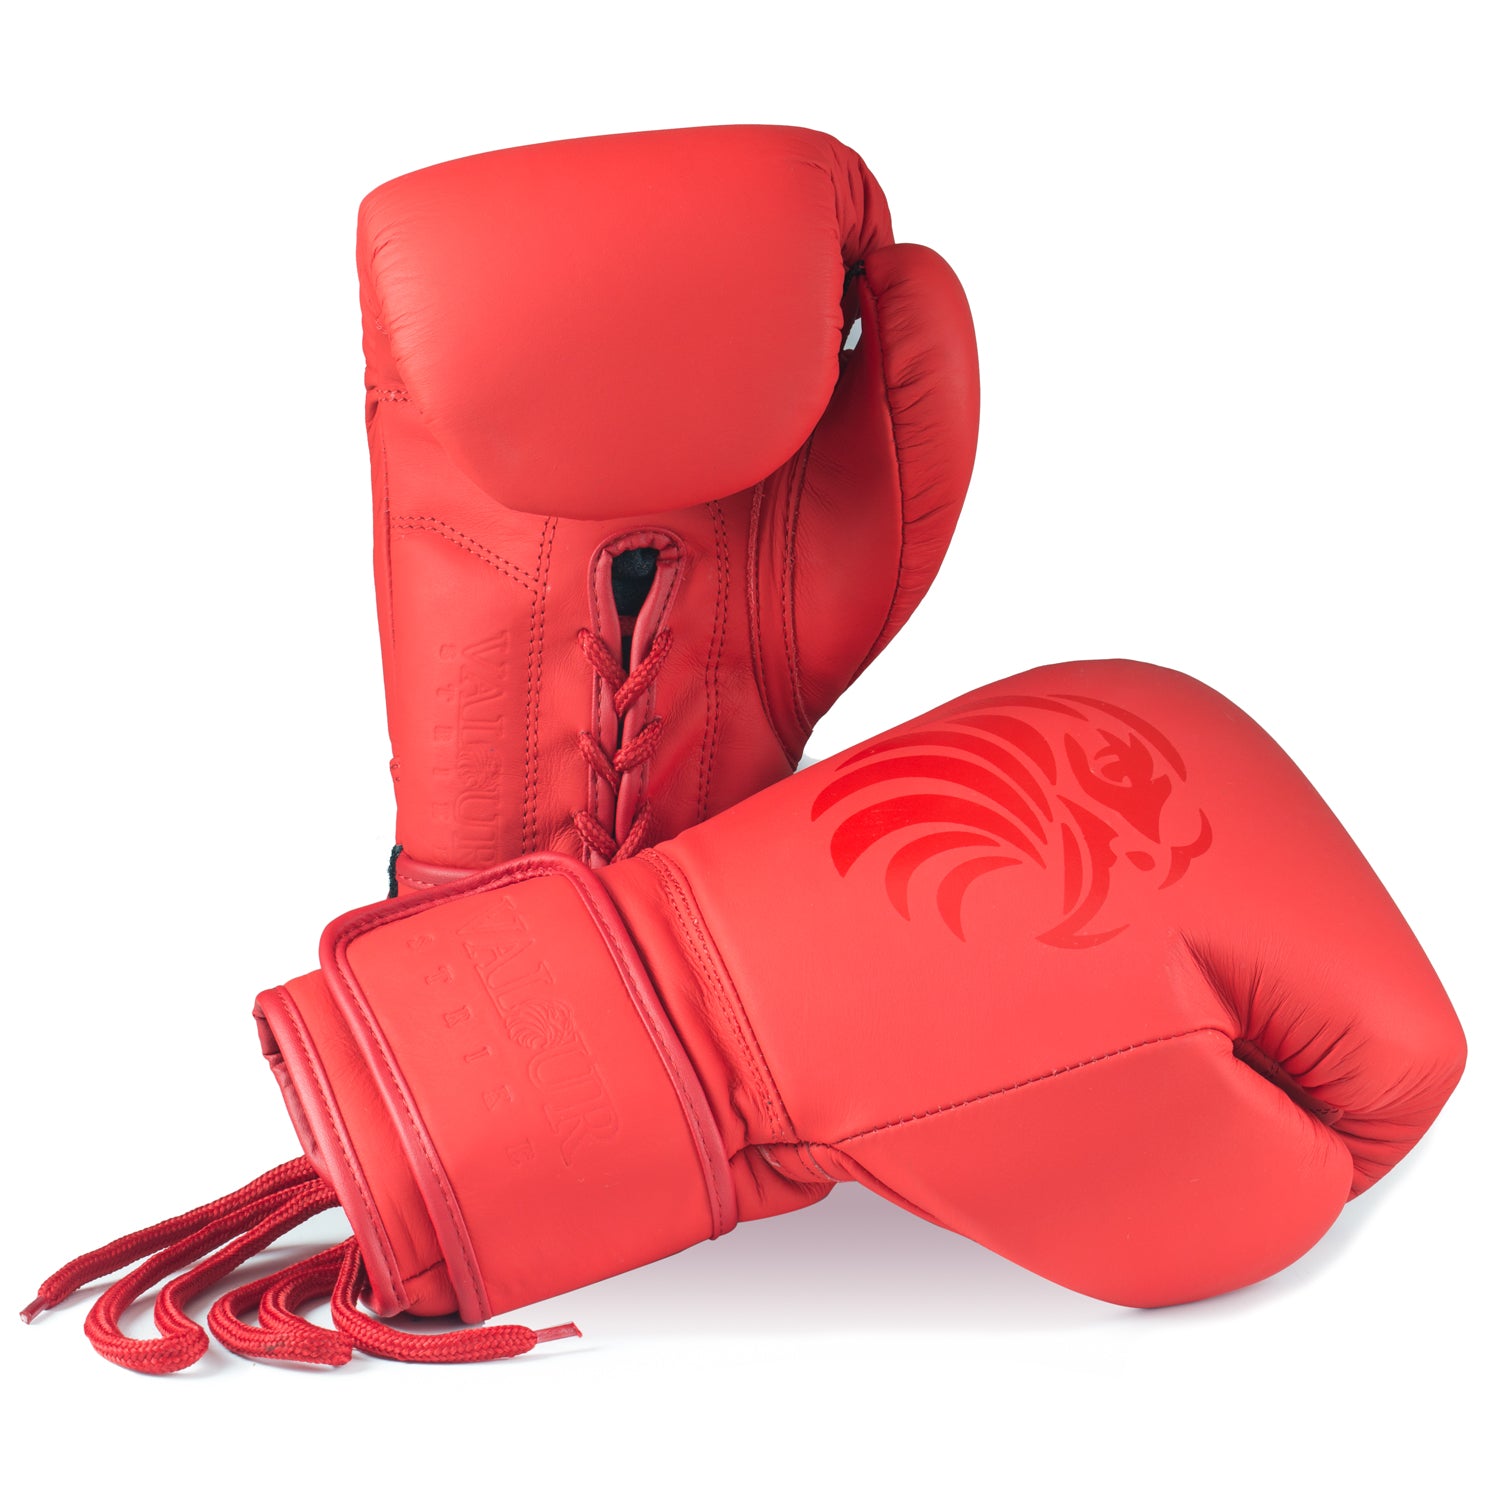 Valour Strike Pro Red Leather Boxing Gloves Sparring India